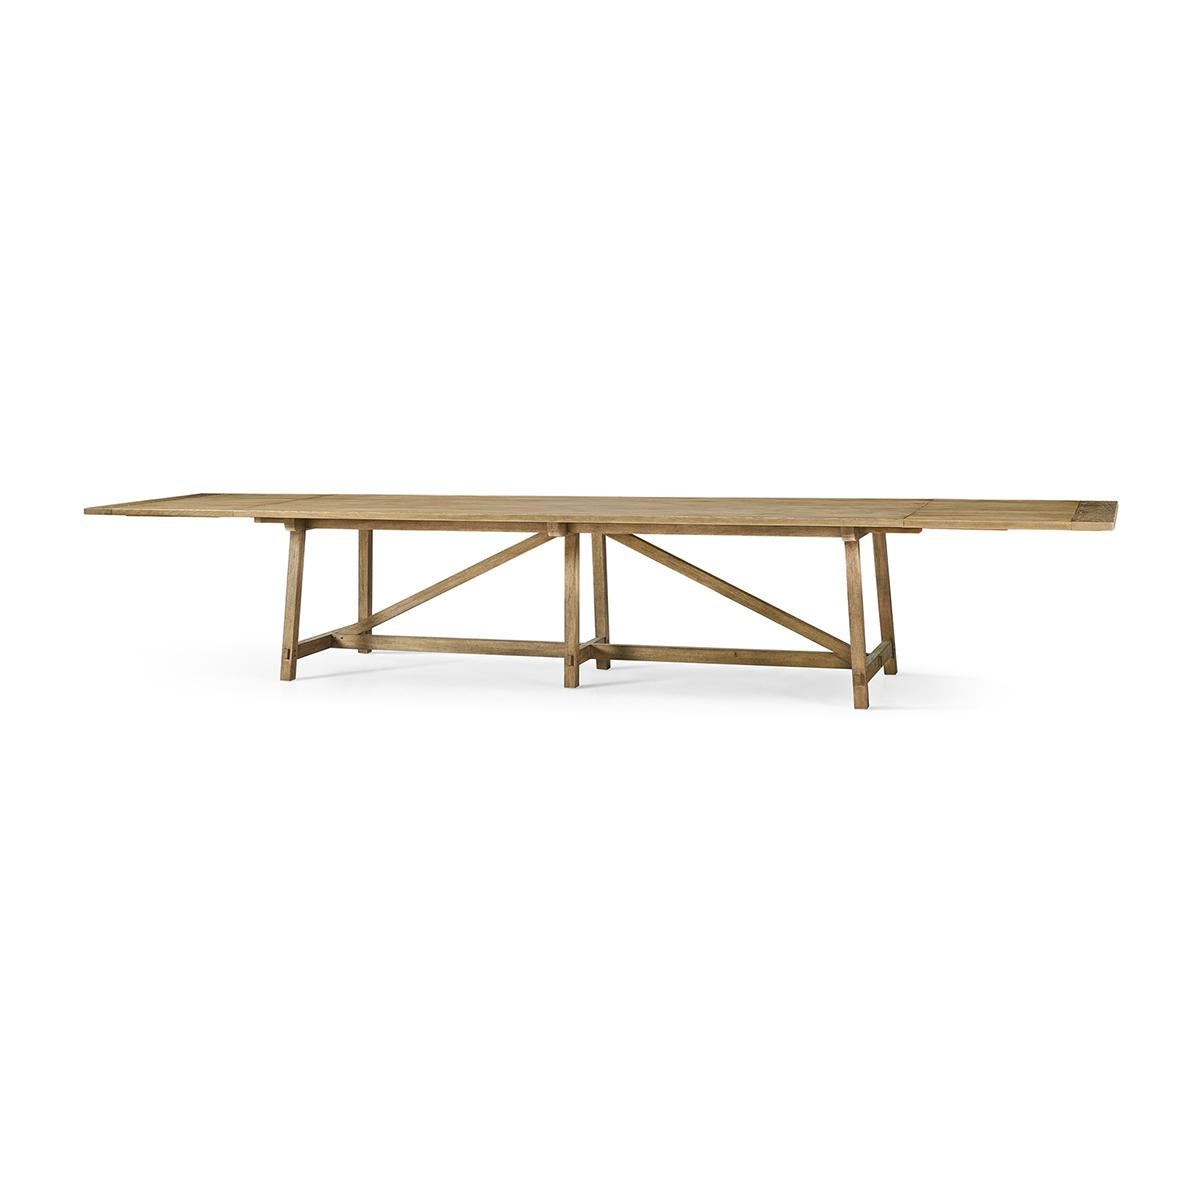 The French Laundry dining table is the perfect combination of furniture craftsmanship, elegant functional solutions, and inspiring design.

Powerful honed forms in stripped Chestnut elicit a raw appreciation for natural materials and offer a